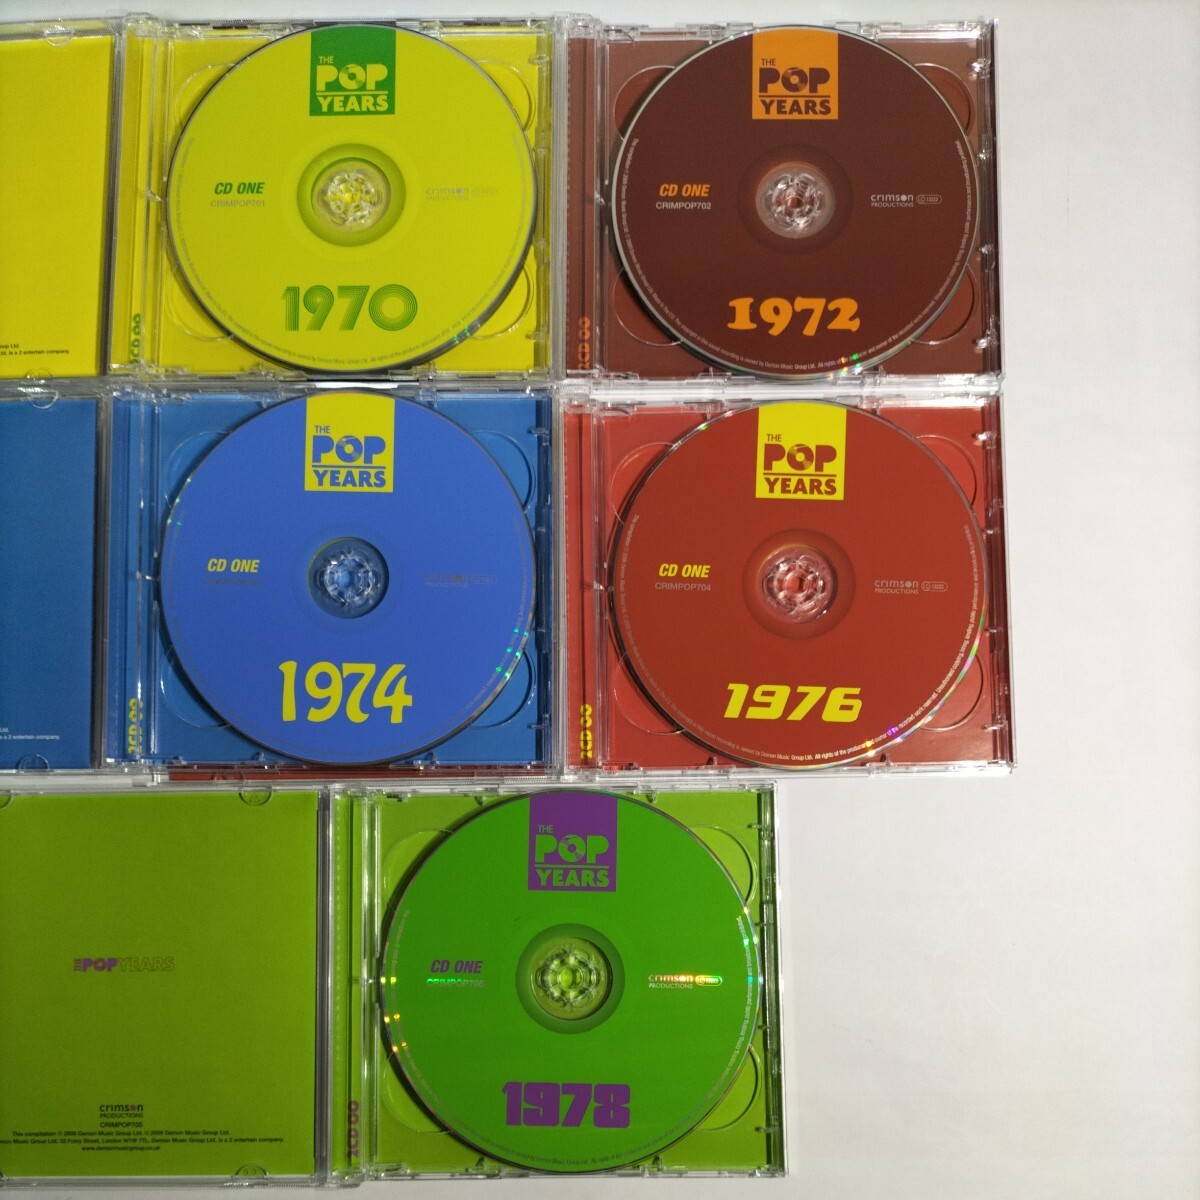 「THE POP YEARS - Classic Pop Hits From 70s - 」2CD×5セット 全10枚 全200曲 70’s 洋楽 ヒット ロック ポップス オムニバスの画像2